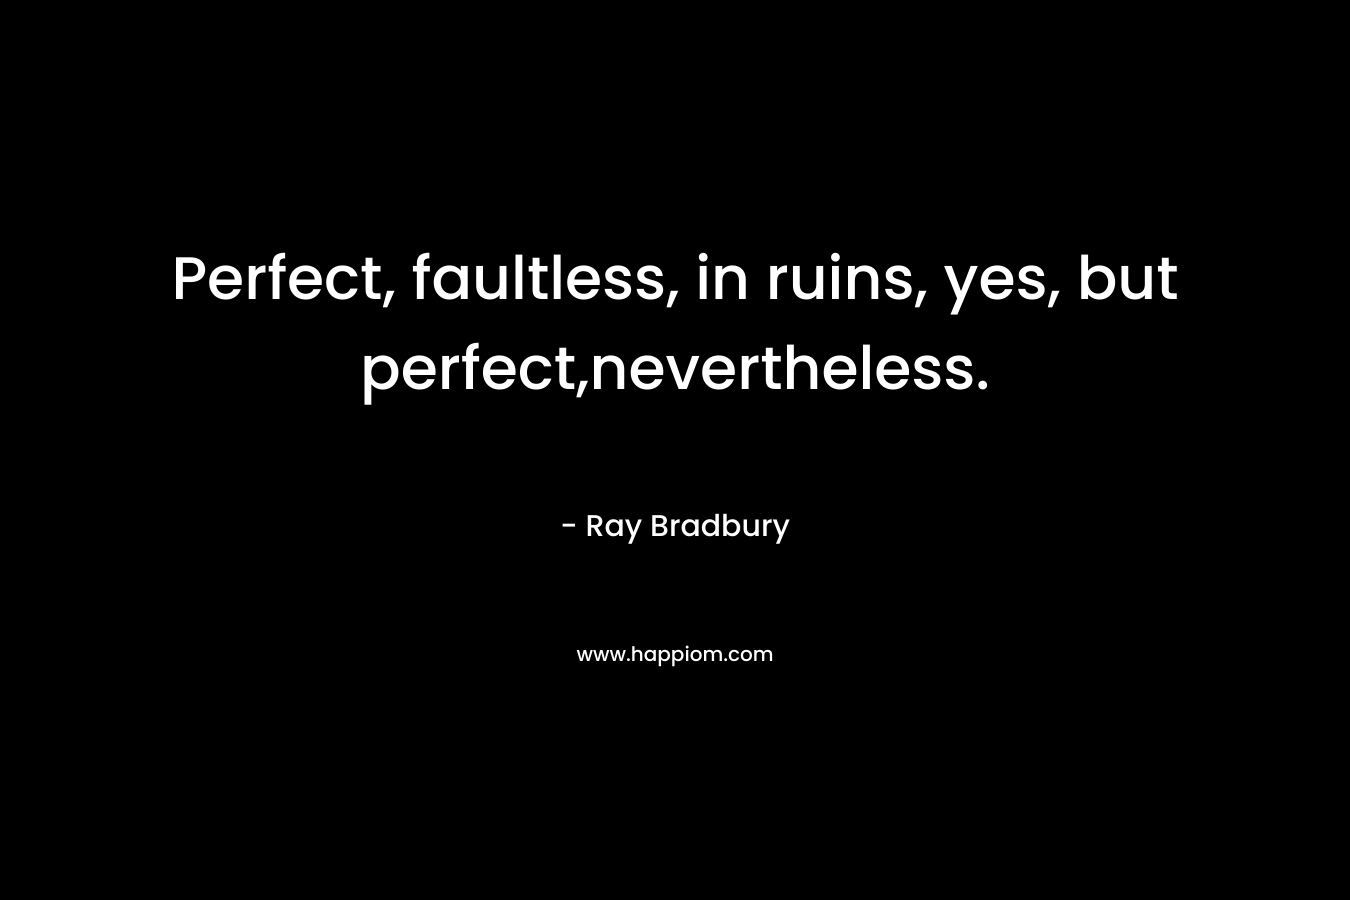 Perfect, faultless, in ruins, yes, but perfect,nevertheless. – Ray Bradbury